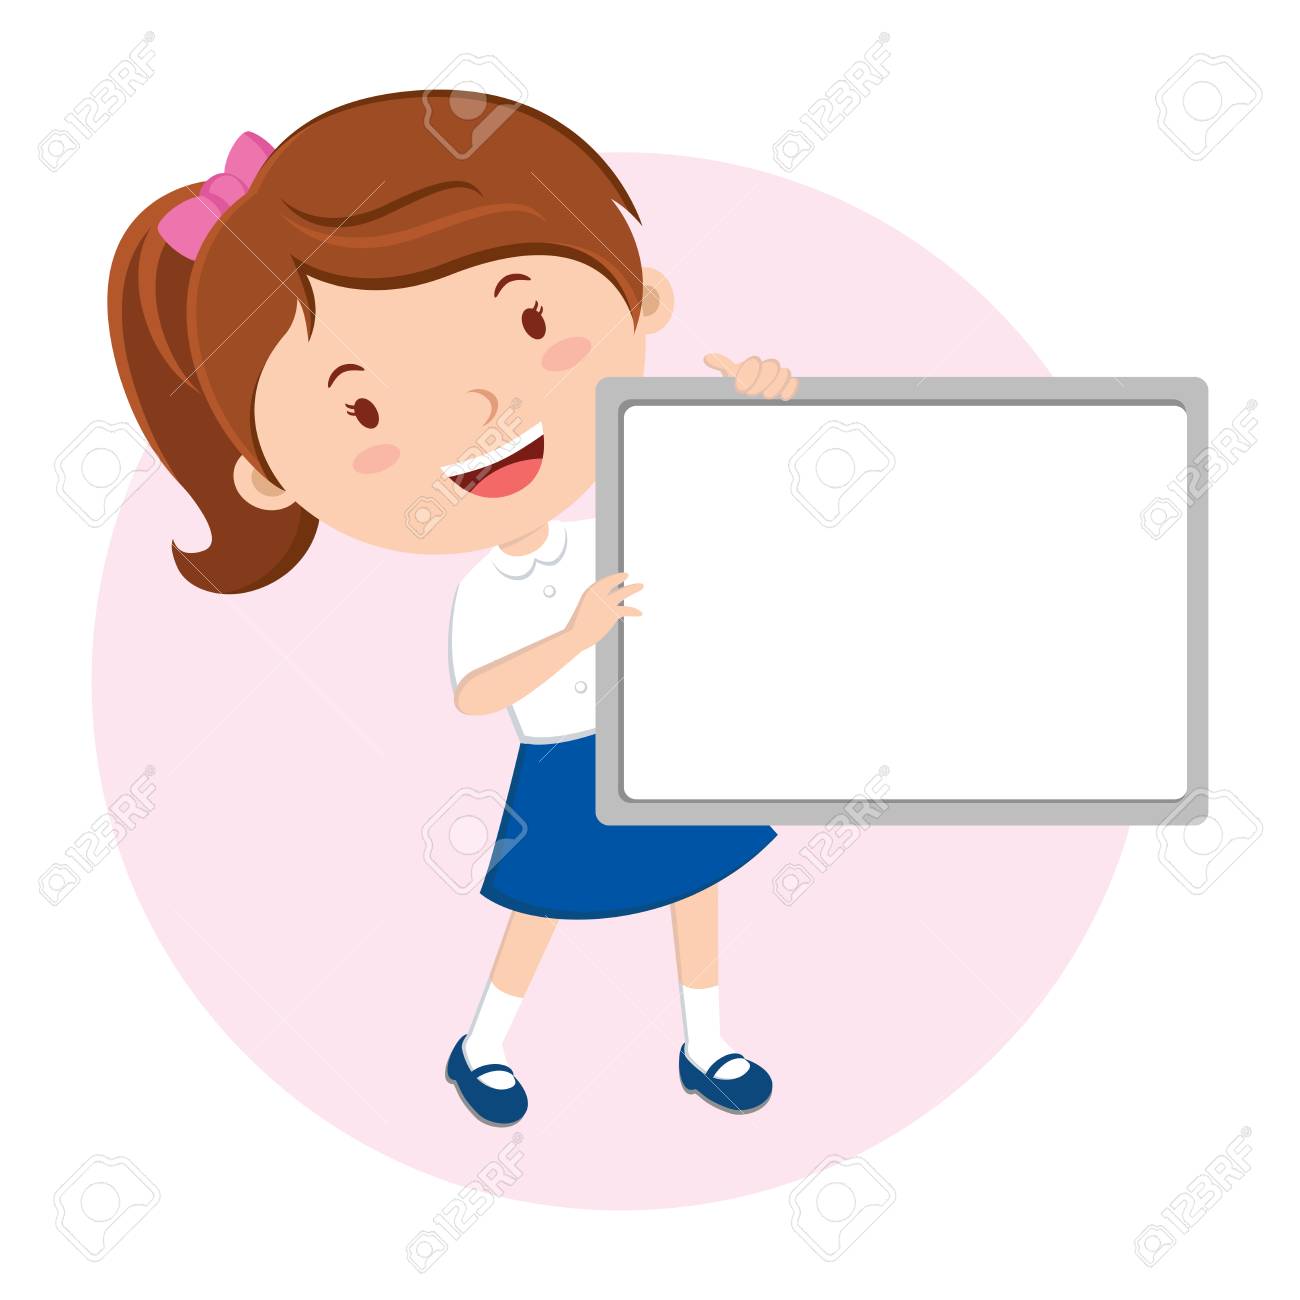 Student whiteboard clipart